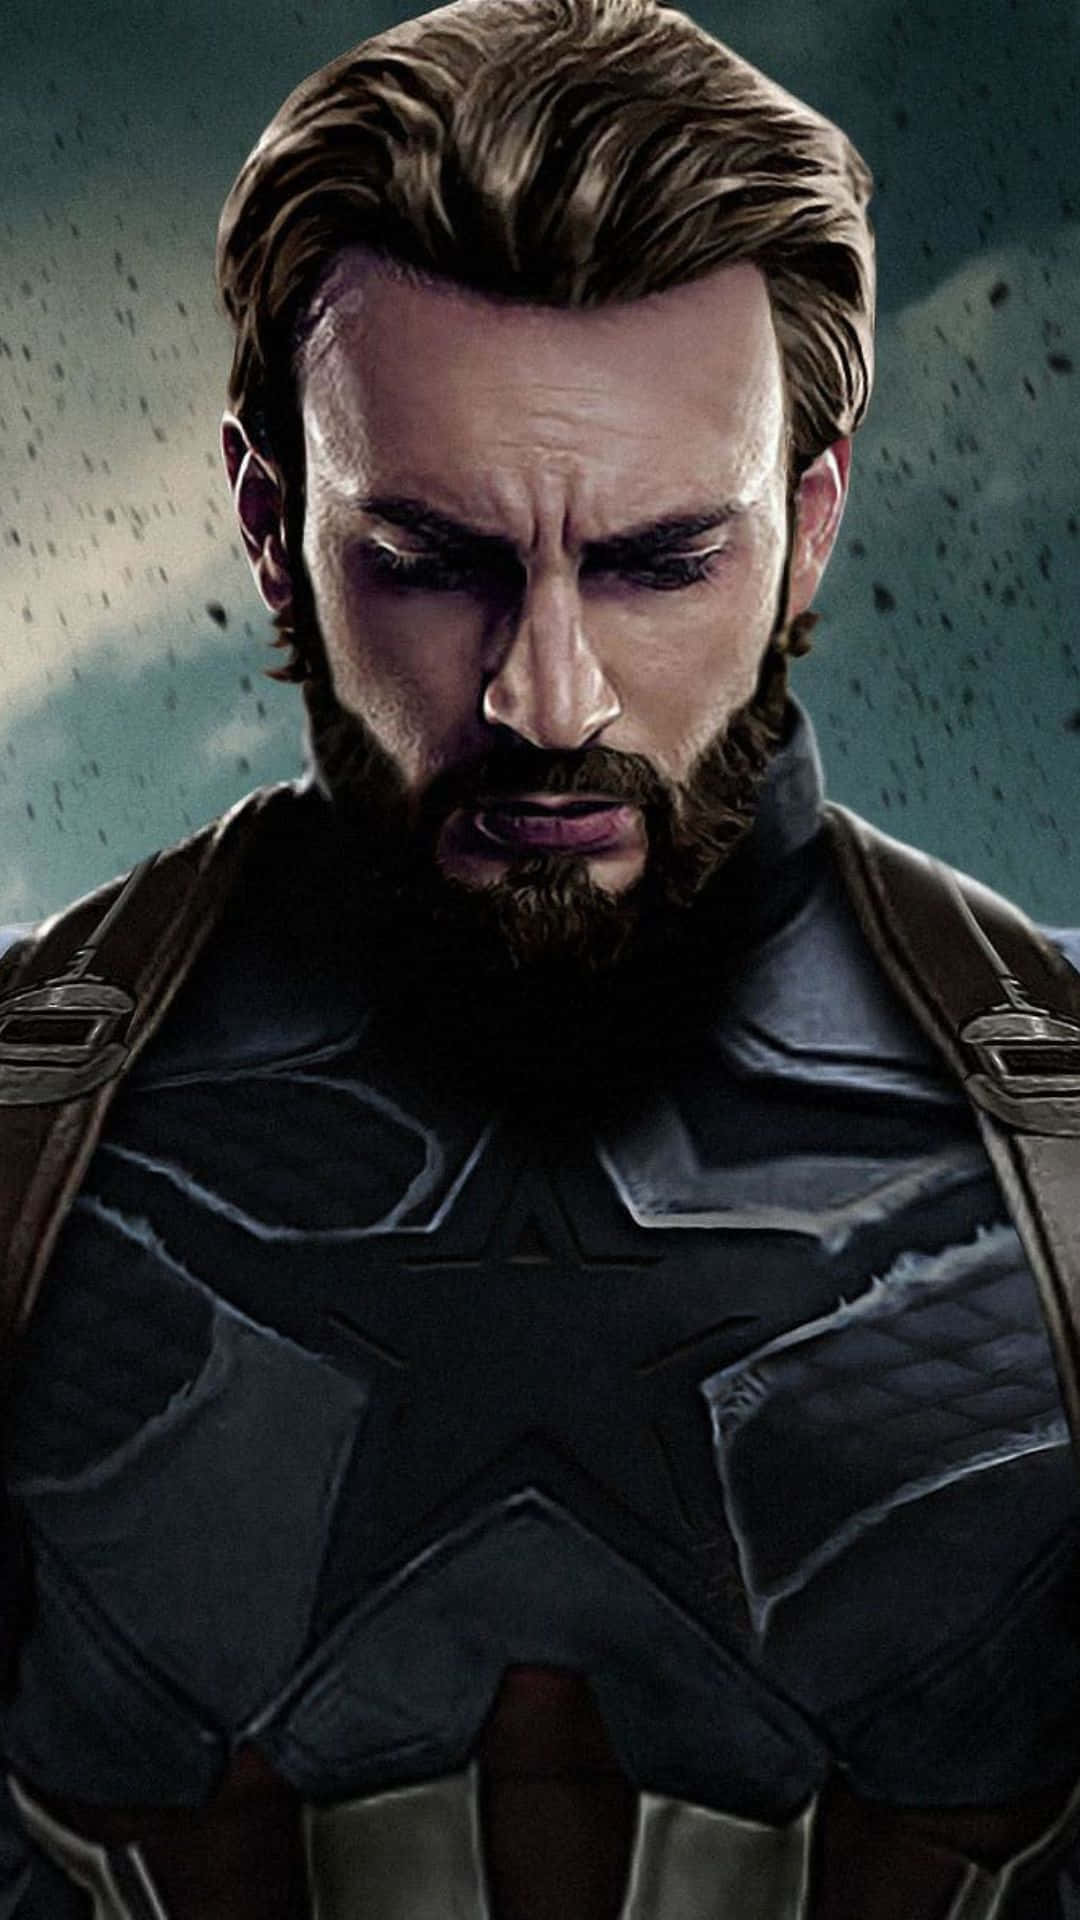 Android Marvel's Avengers Captain America Without The Mask Background